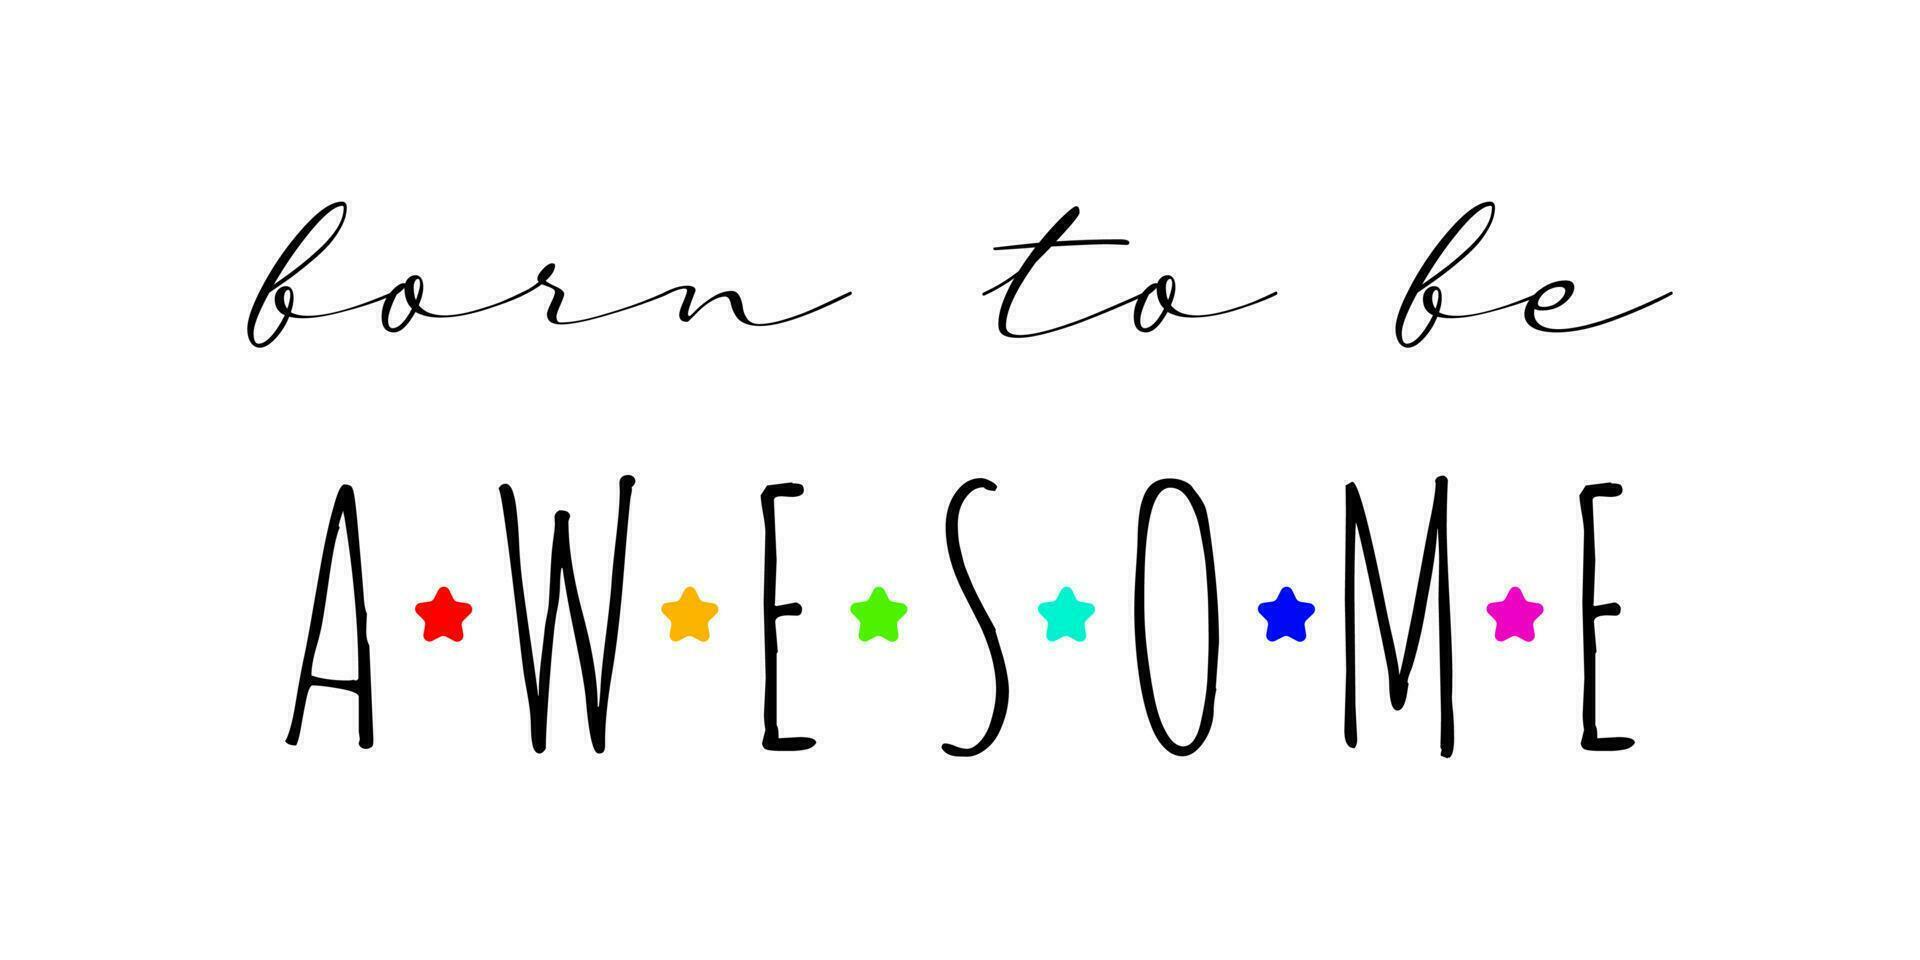 Born to be awesome. Self esteem handwritten lettering. Cute card or t-shirt print template. Vector quote illustration.